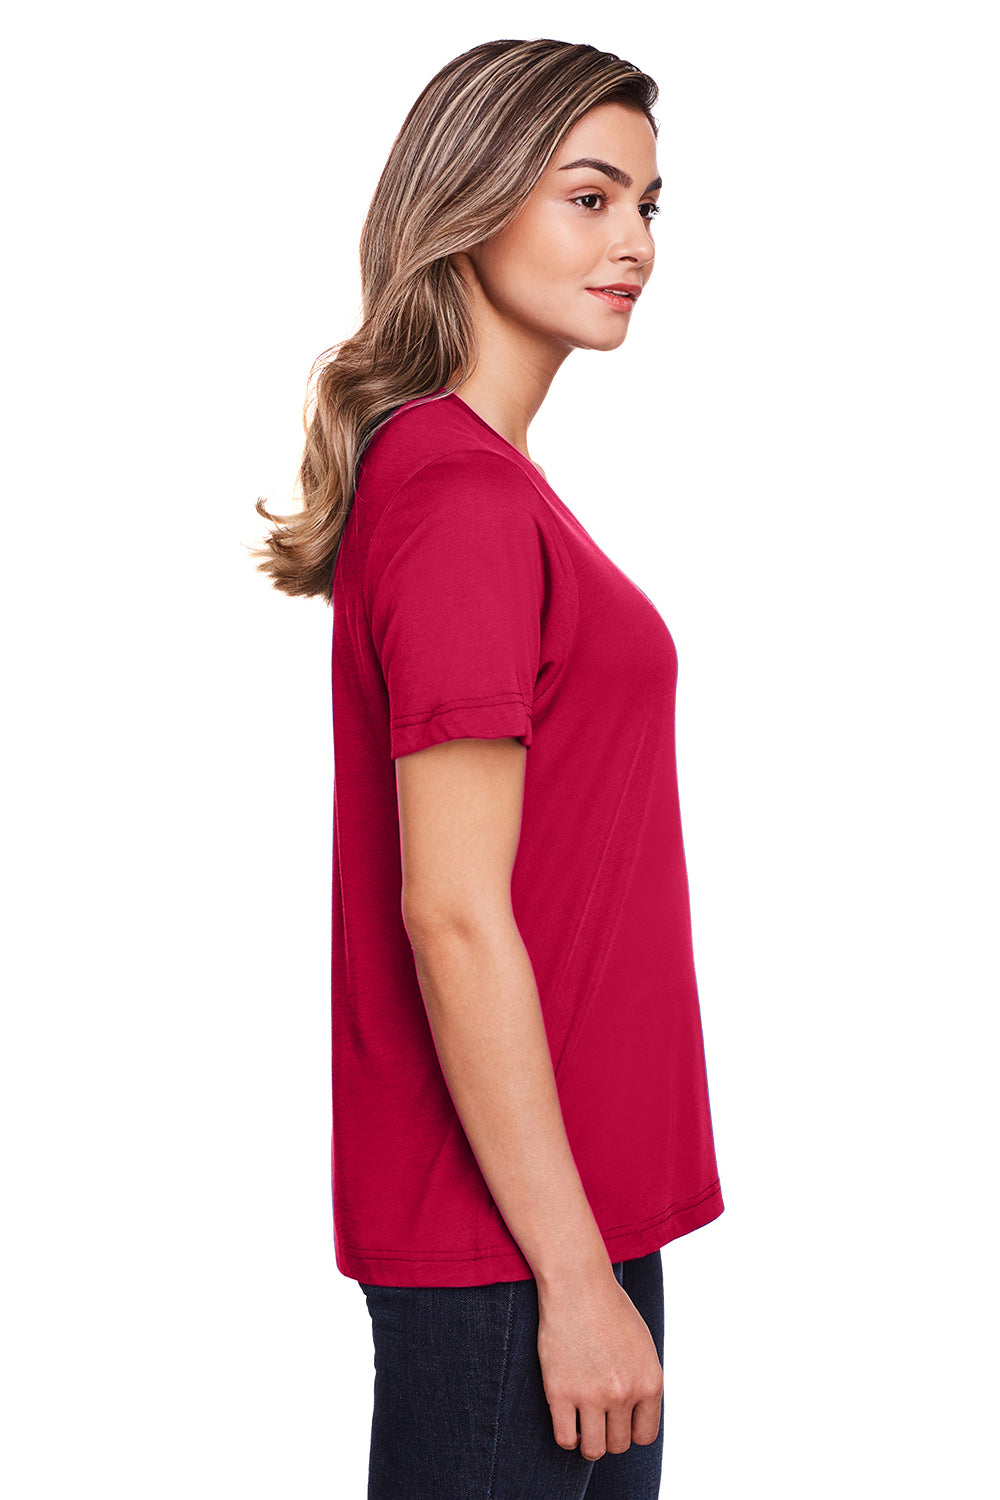 Core 365 CE111W Womens Fusion ChromaSoft Performance Moisture Wicking Short Sleeve Scoop Neck T-Shirt Red Side